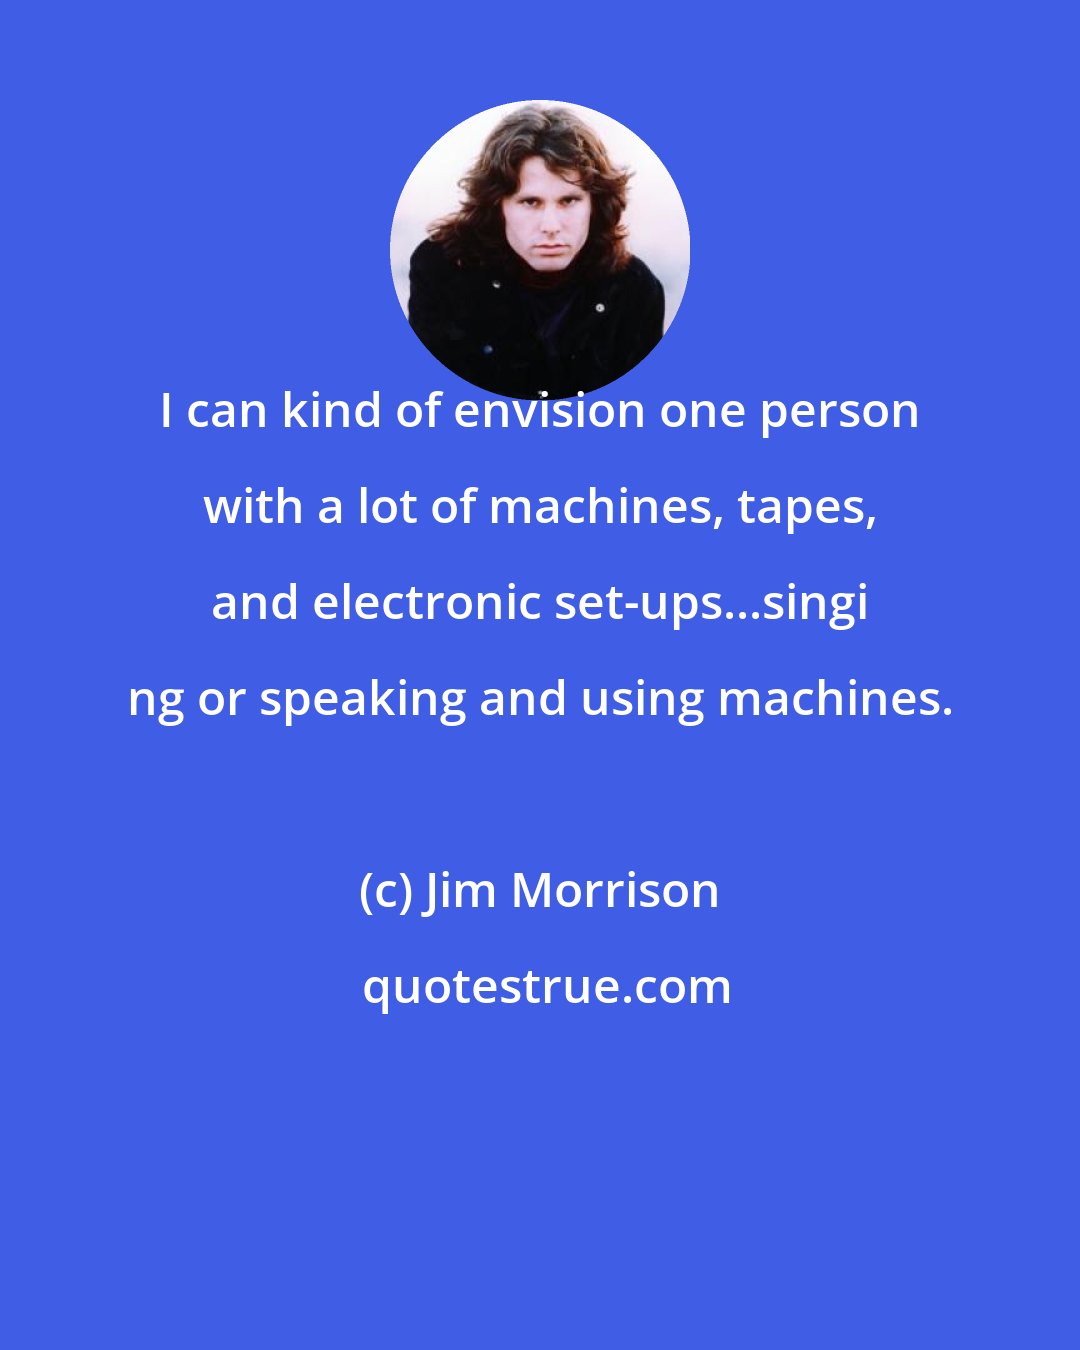 Jim Morrison: I can kind of envision one person with a lot of machines, tapes, and electronic set-ups...singi ng or speaking and using machines.